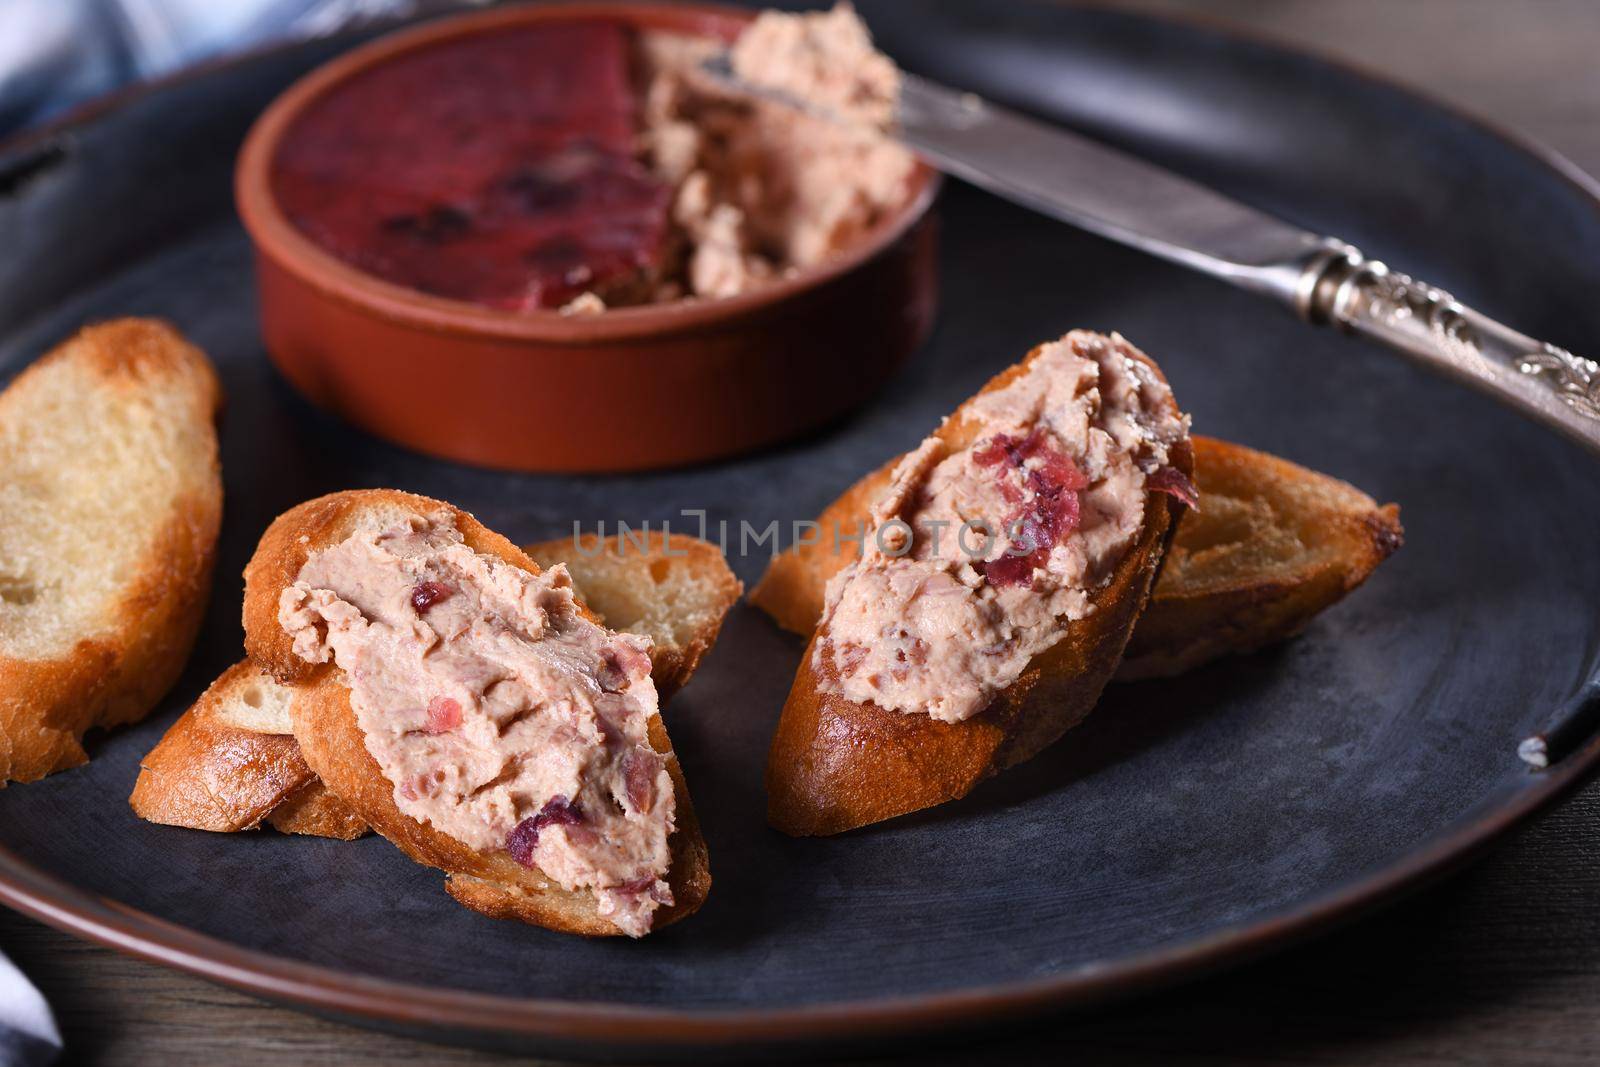 Chicken pate with cranberry jelly by Apolonia